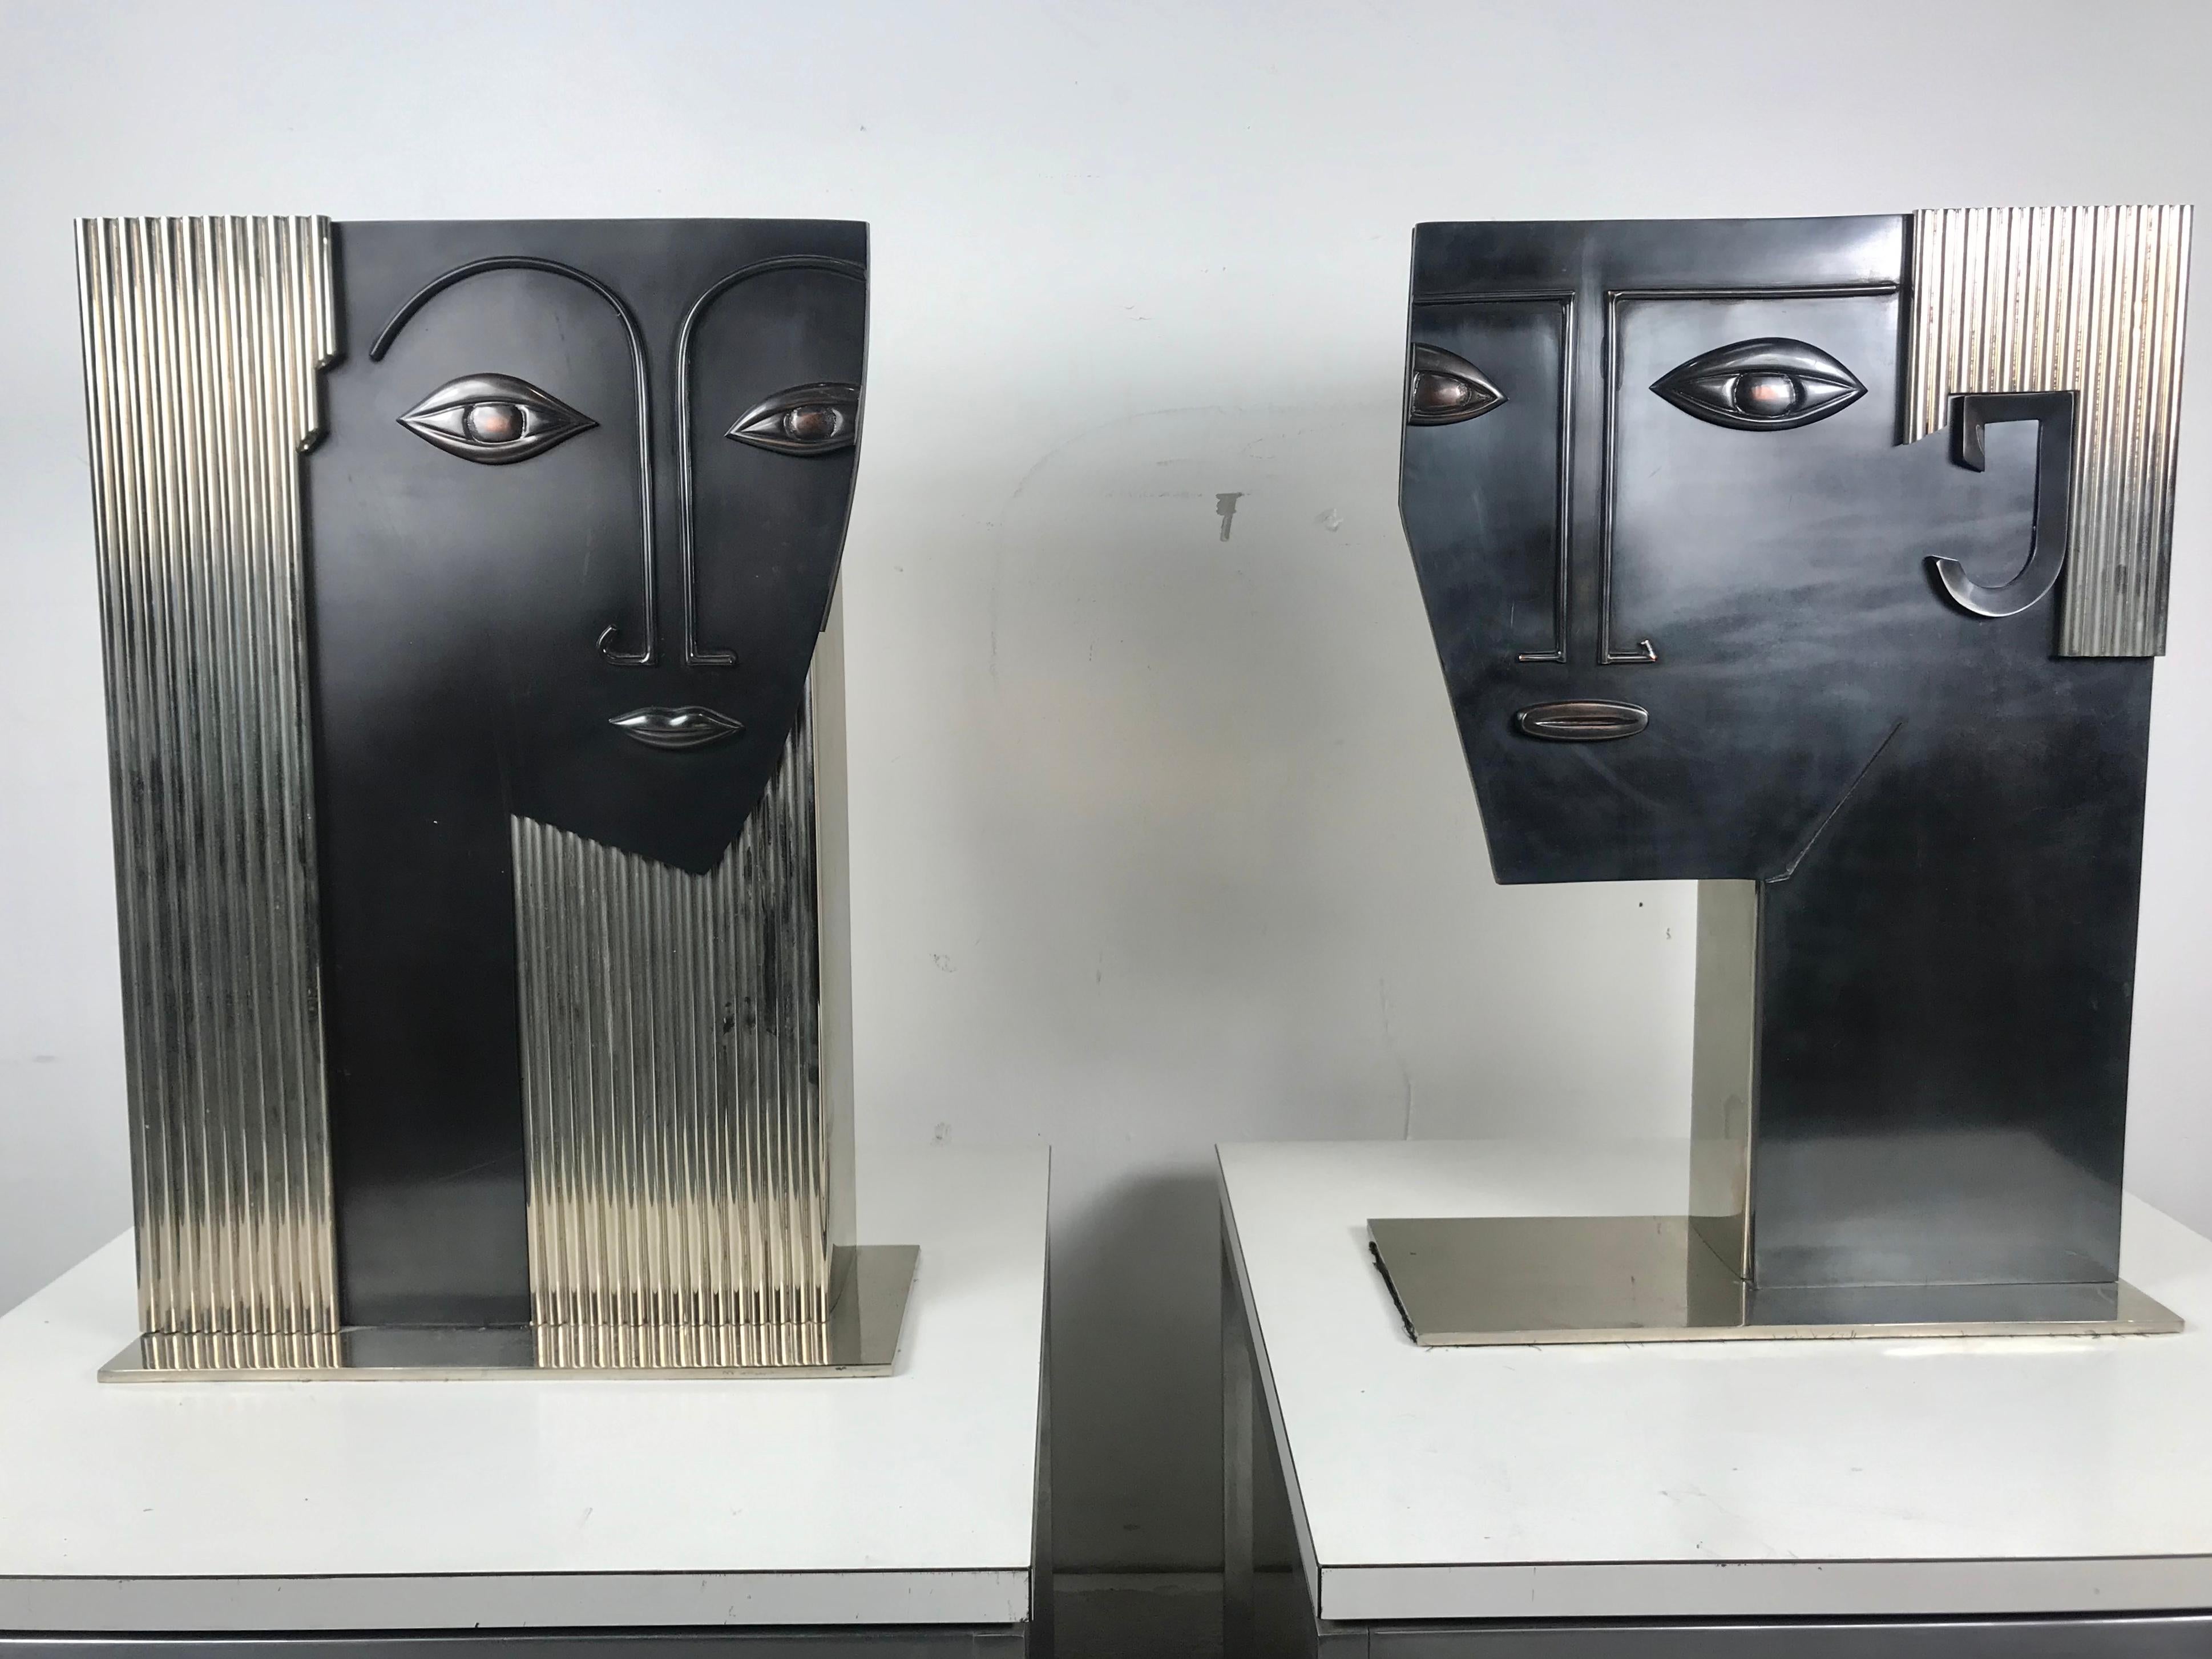 Large-scale pair of Art Deco stylized face vases of a man and woman after Franz Hagenauer. All metal, fine quality construction, nickel and what appears to be bronze. Extremely heavy.